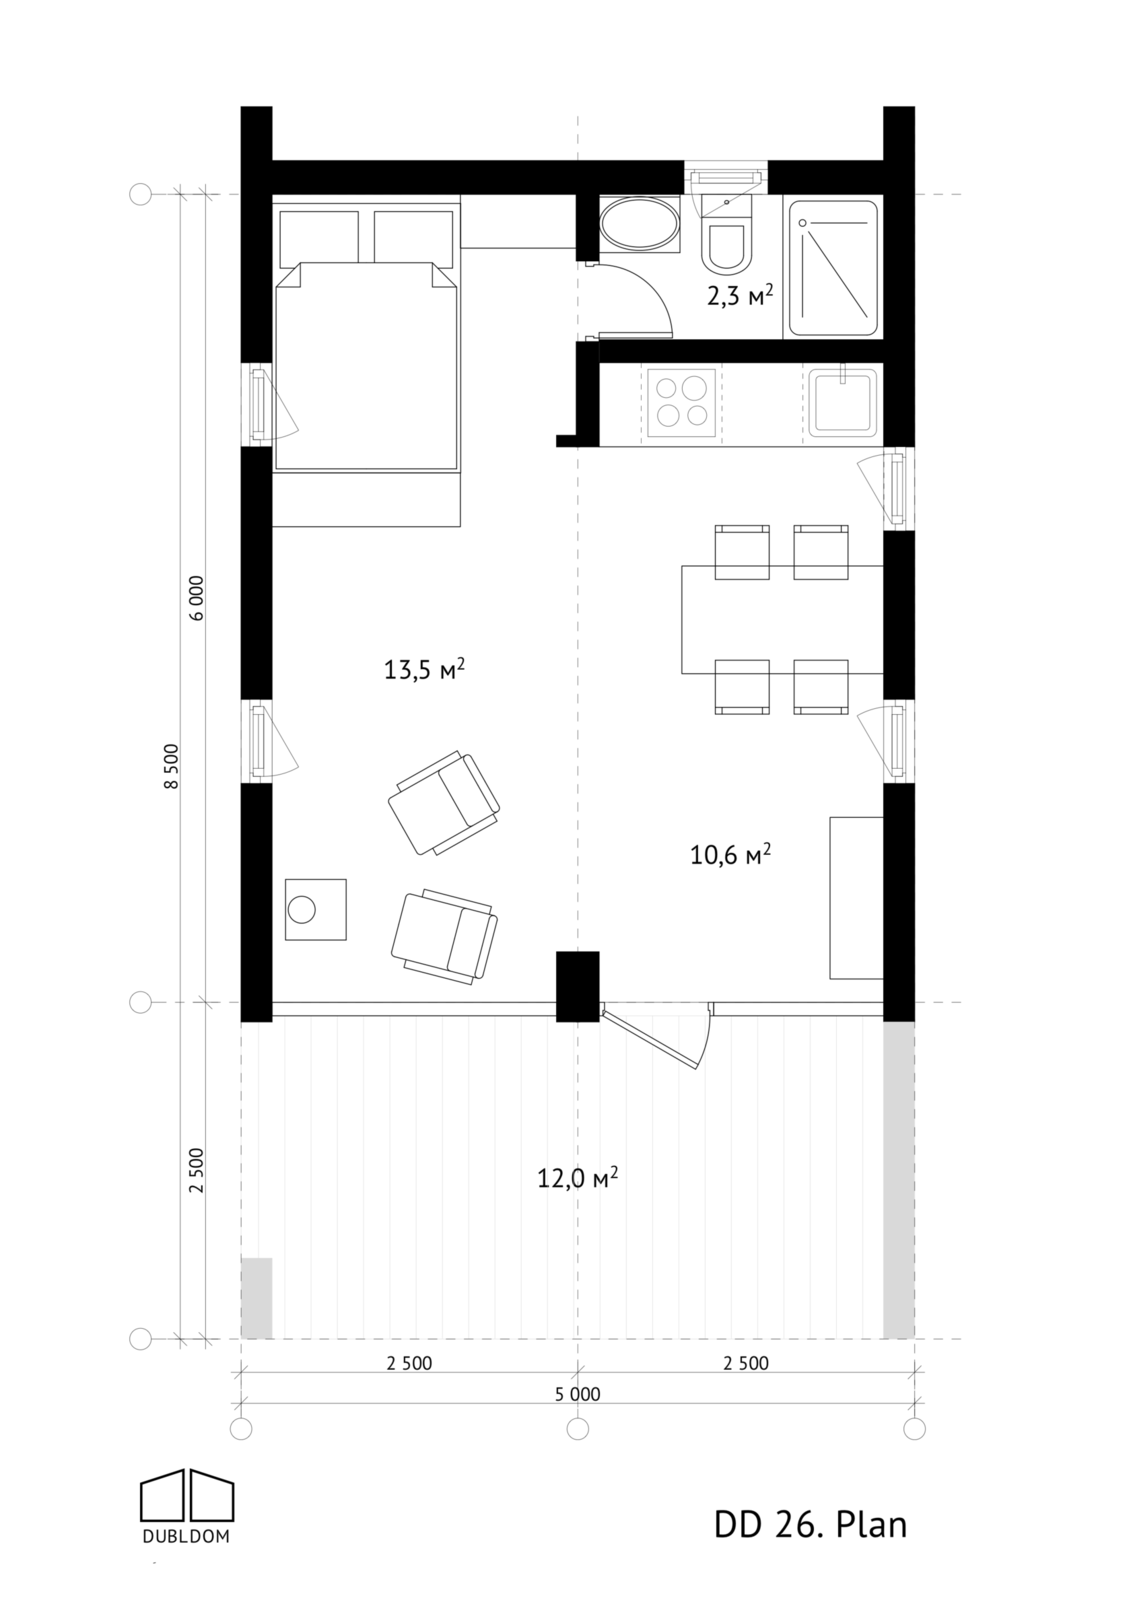 House Site Plan Drawing